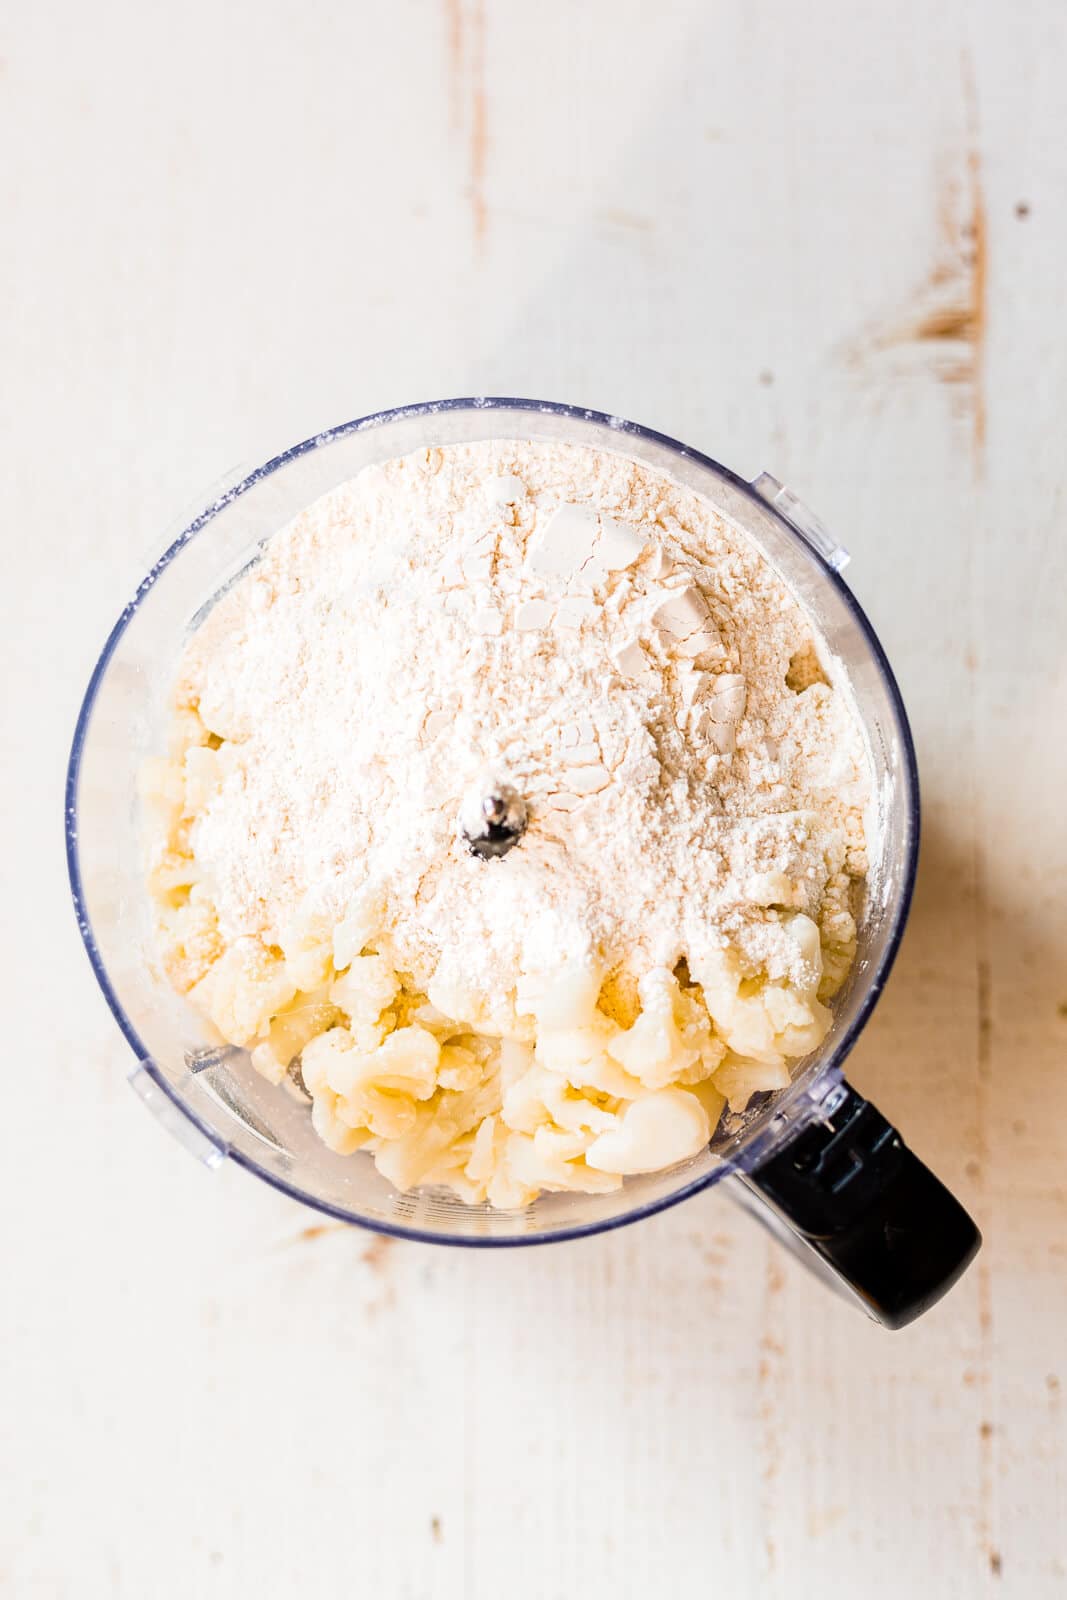 cauliflower and cassava flour in the bowl of a food processor